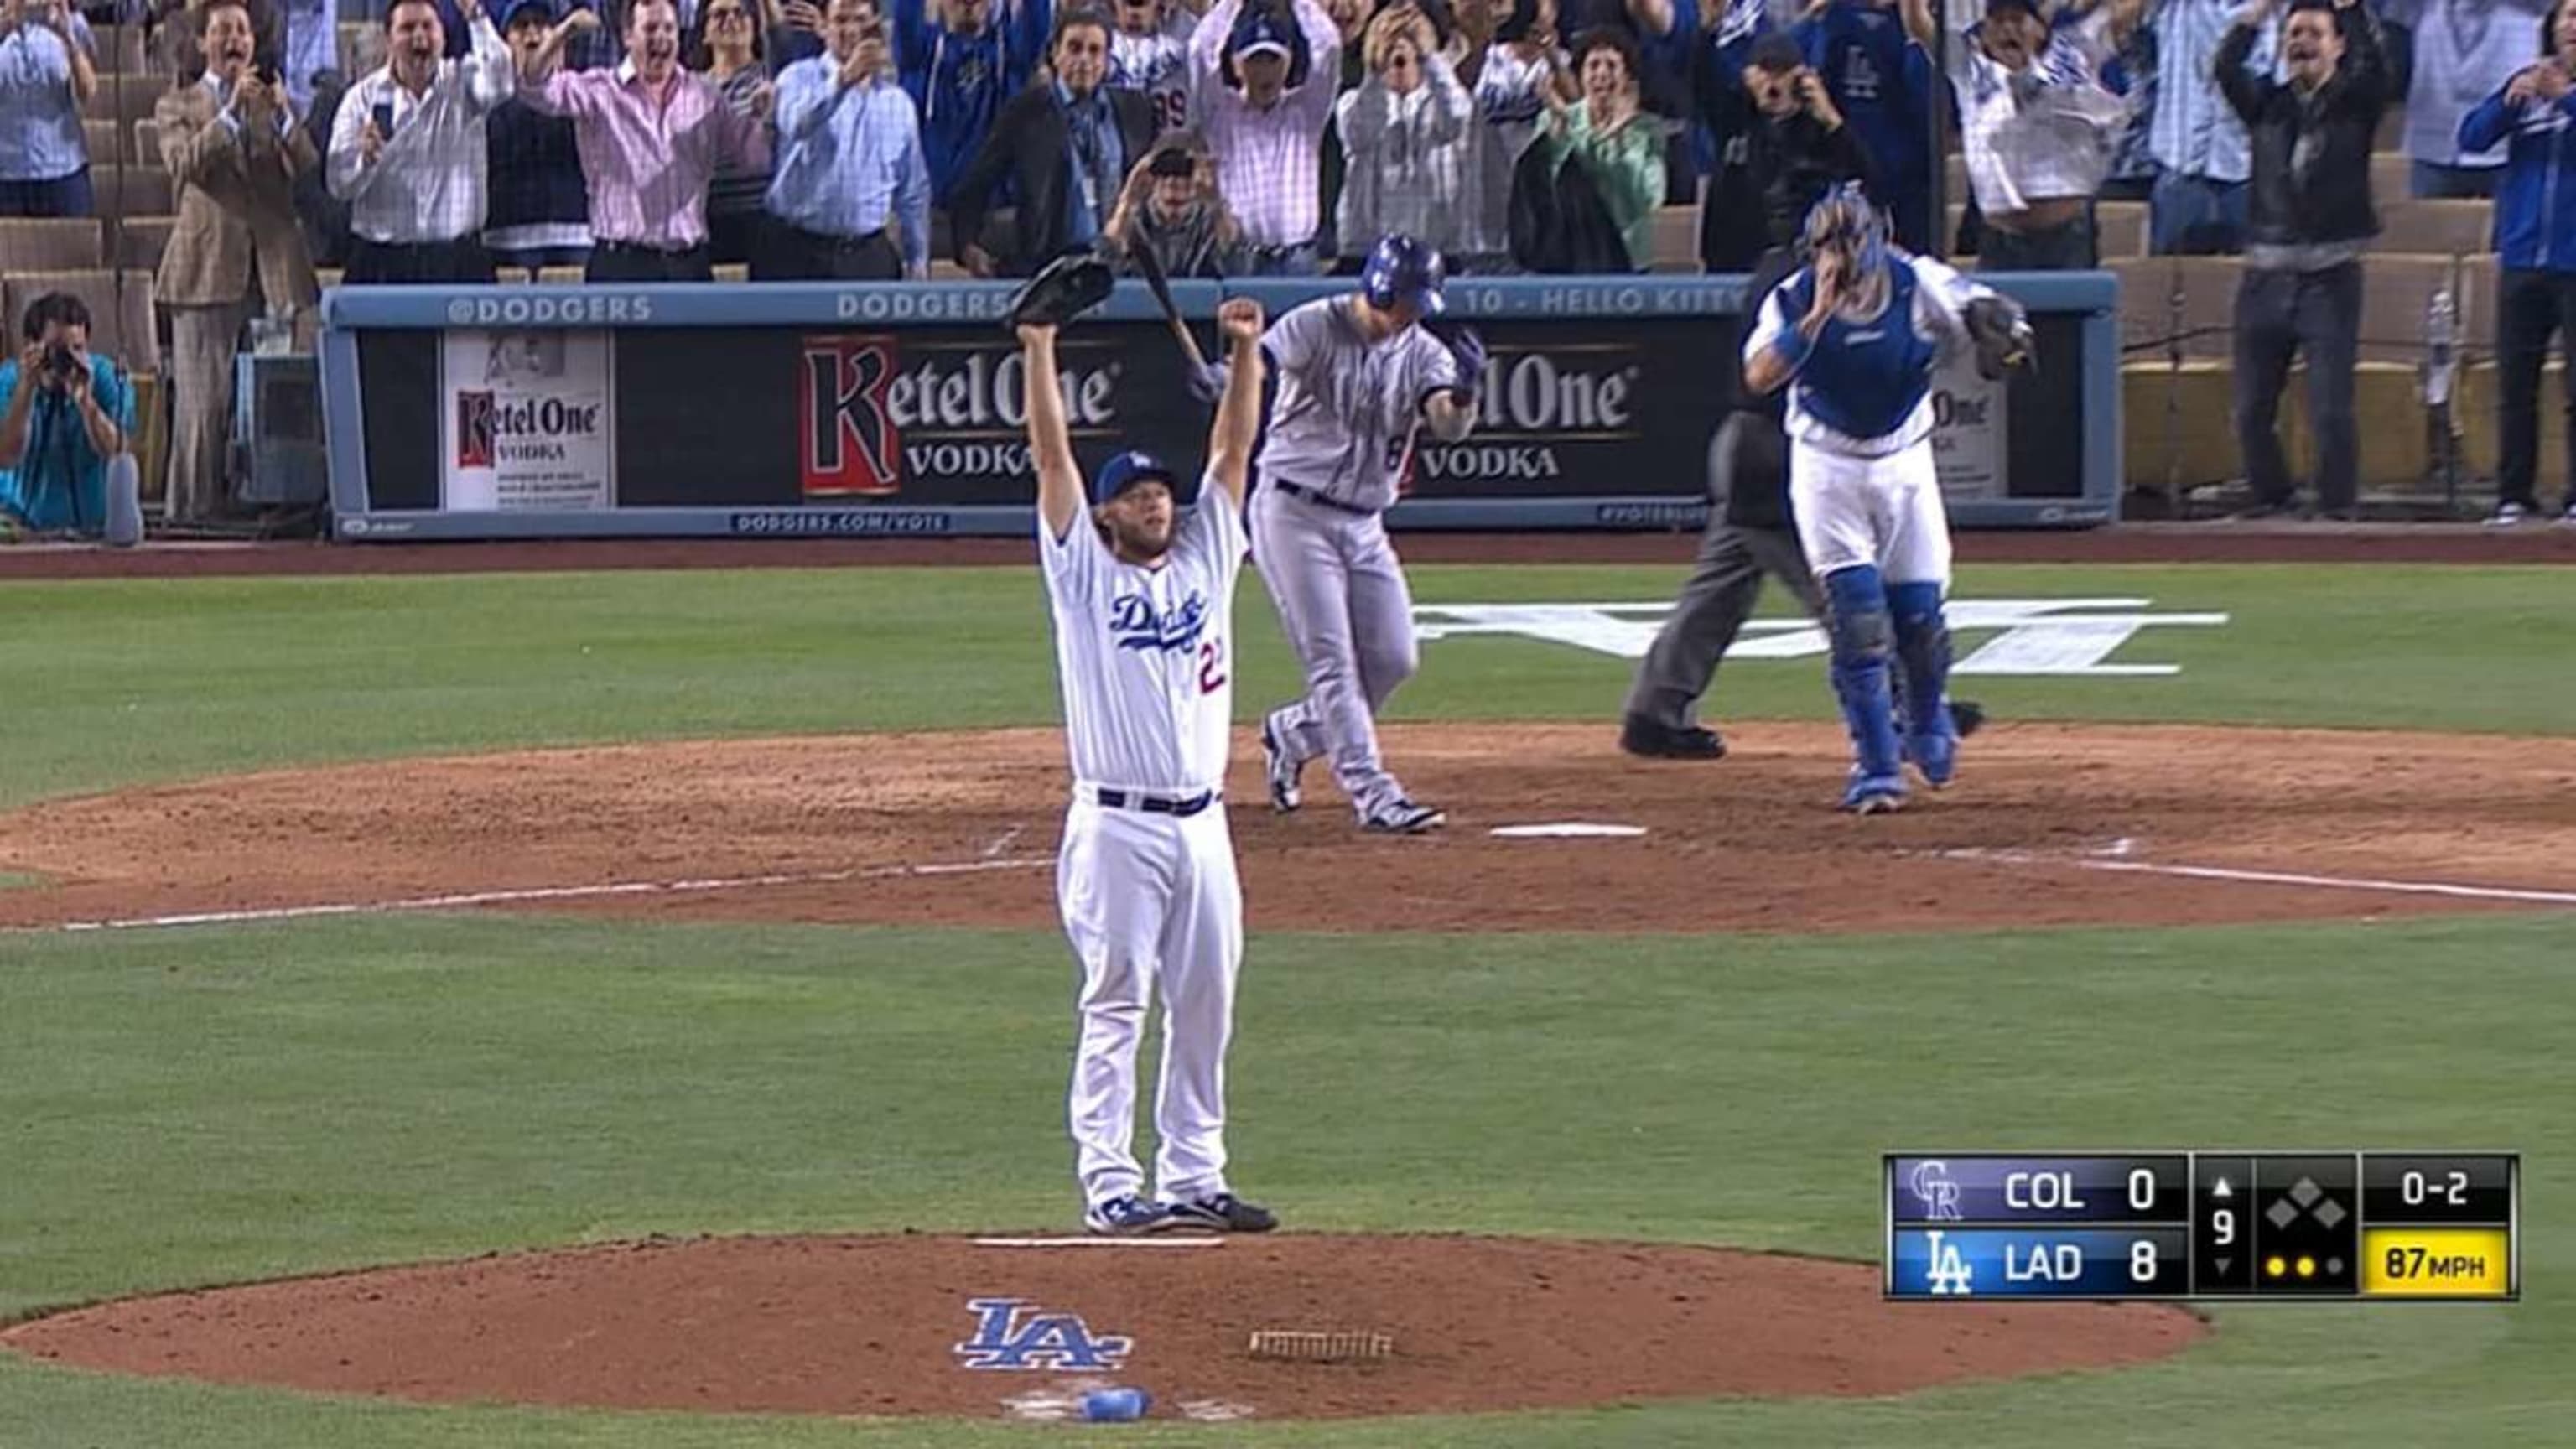 Kershaw completes no-no with a K